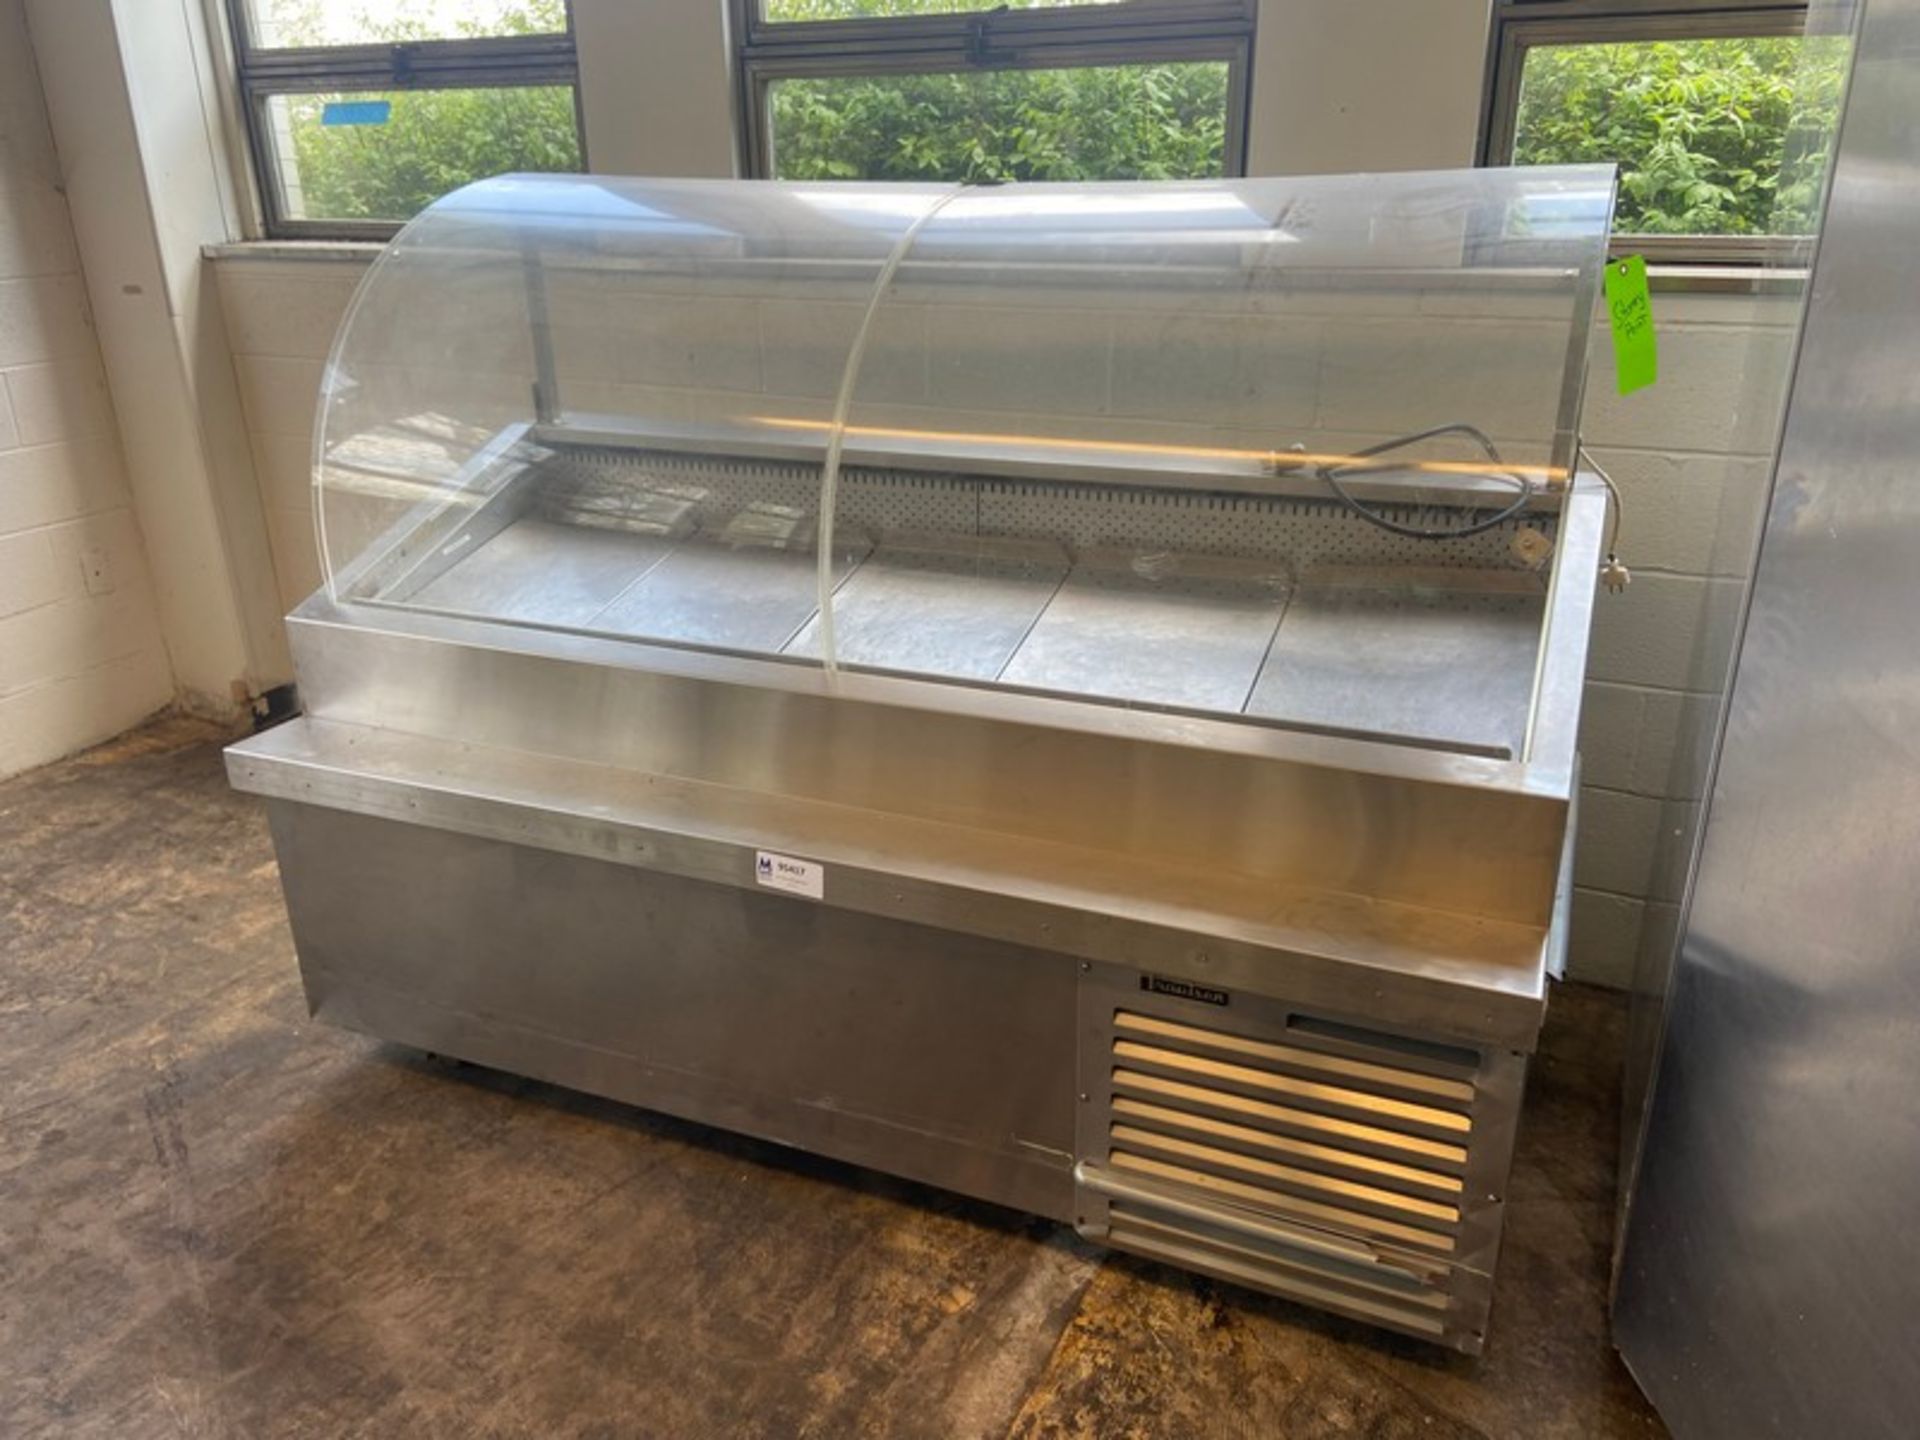 Traulsen Refrigerated Display CaseOverall Dims.: Aprox. 80" L x 36" W x 59" H, with S/S Bottom (